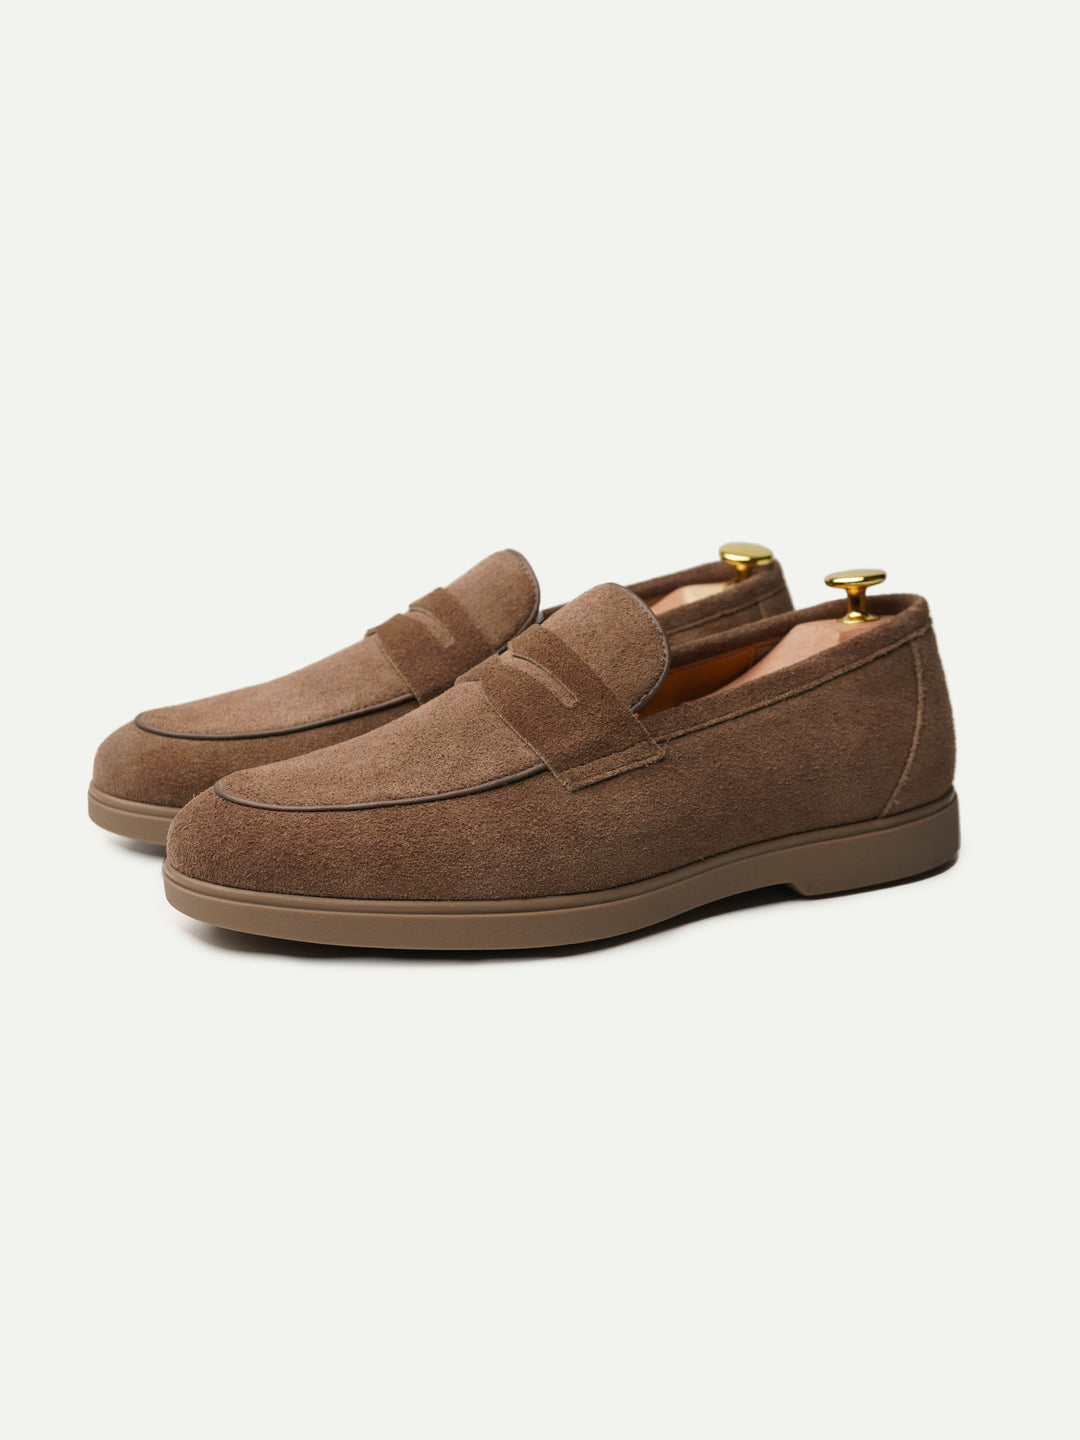 Martin loafers